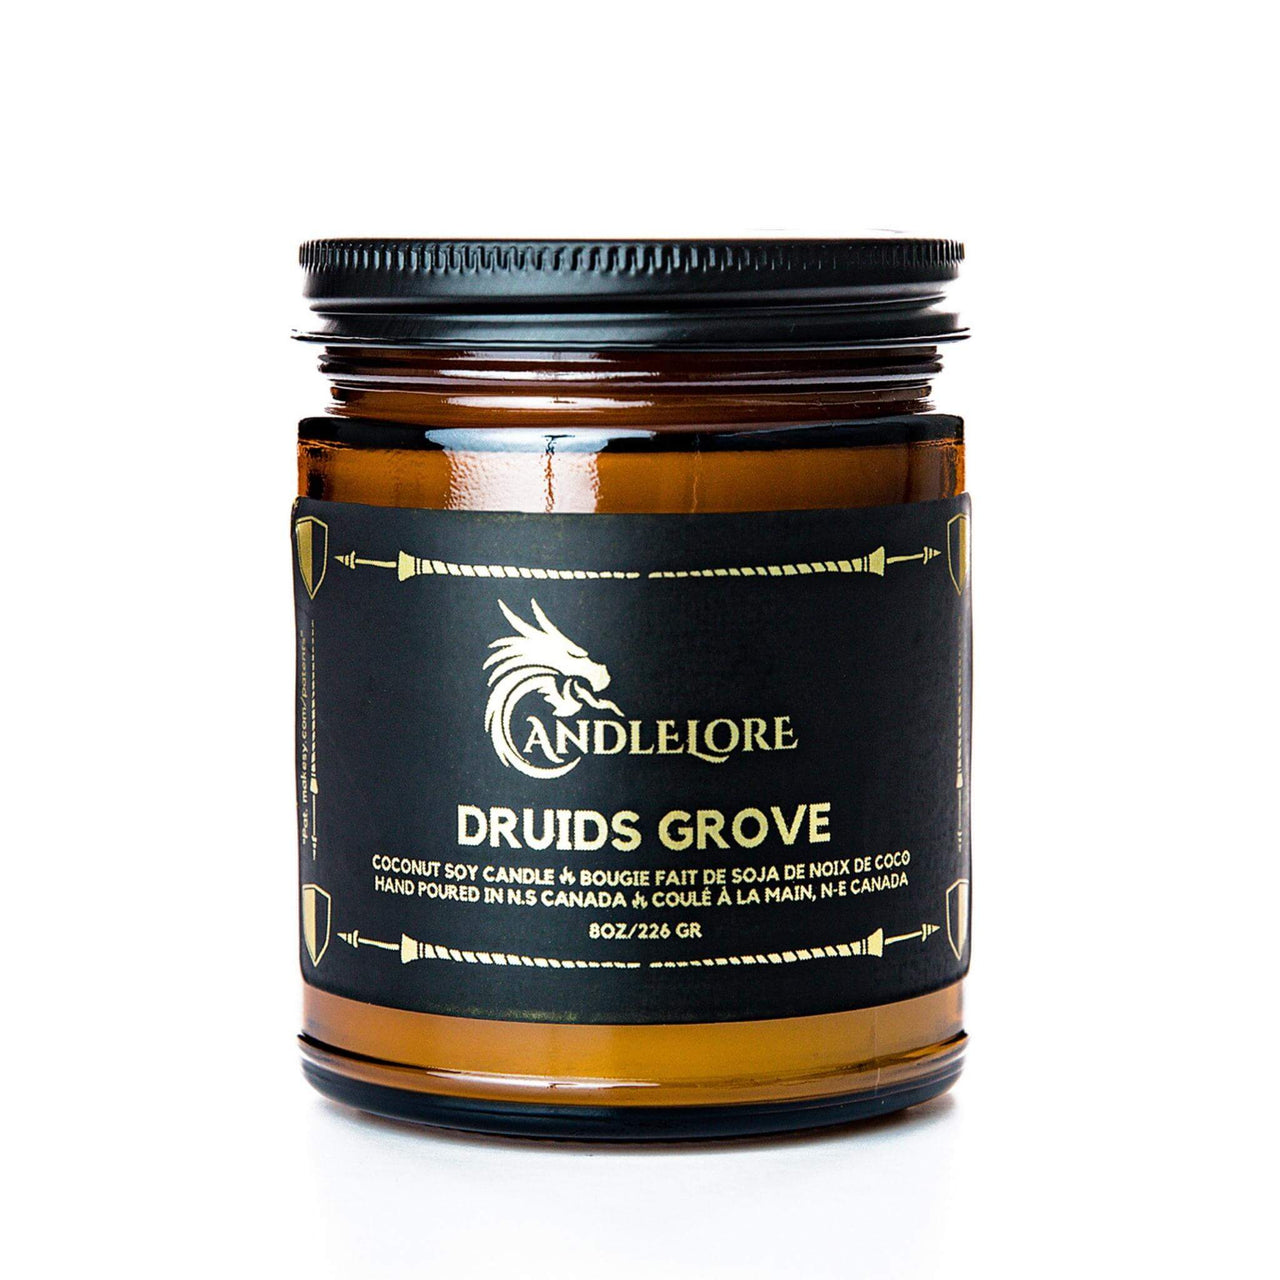 Medium Druids Grove scented candle on a white background